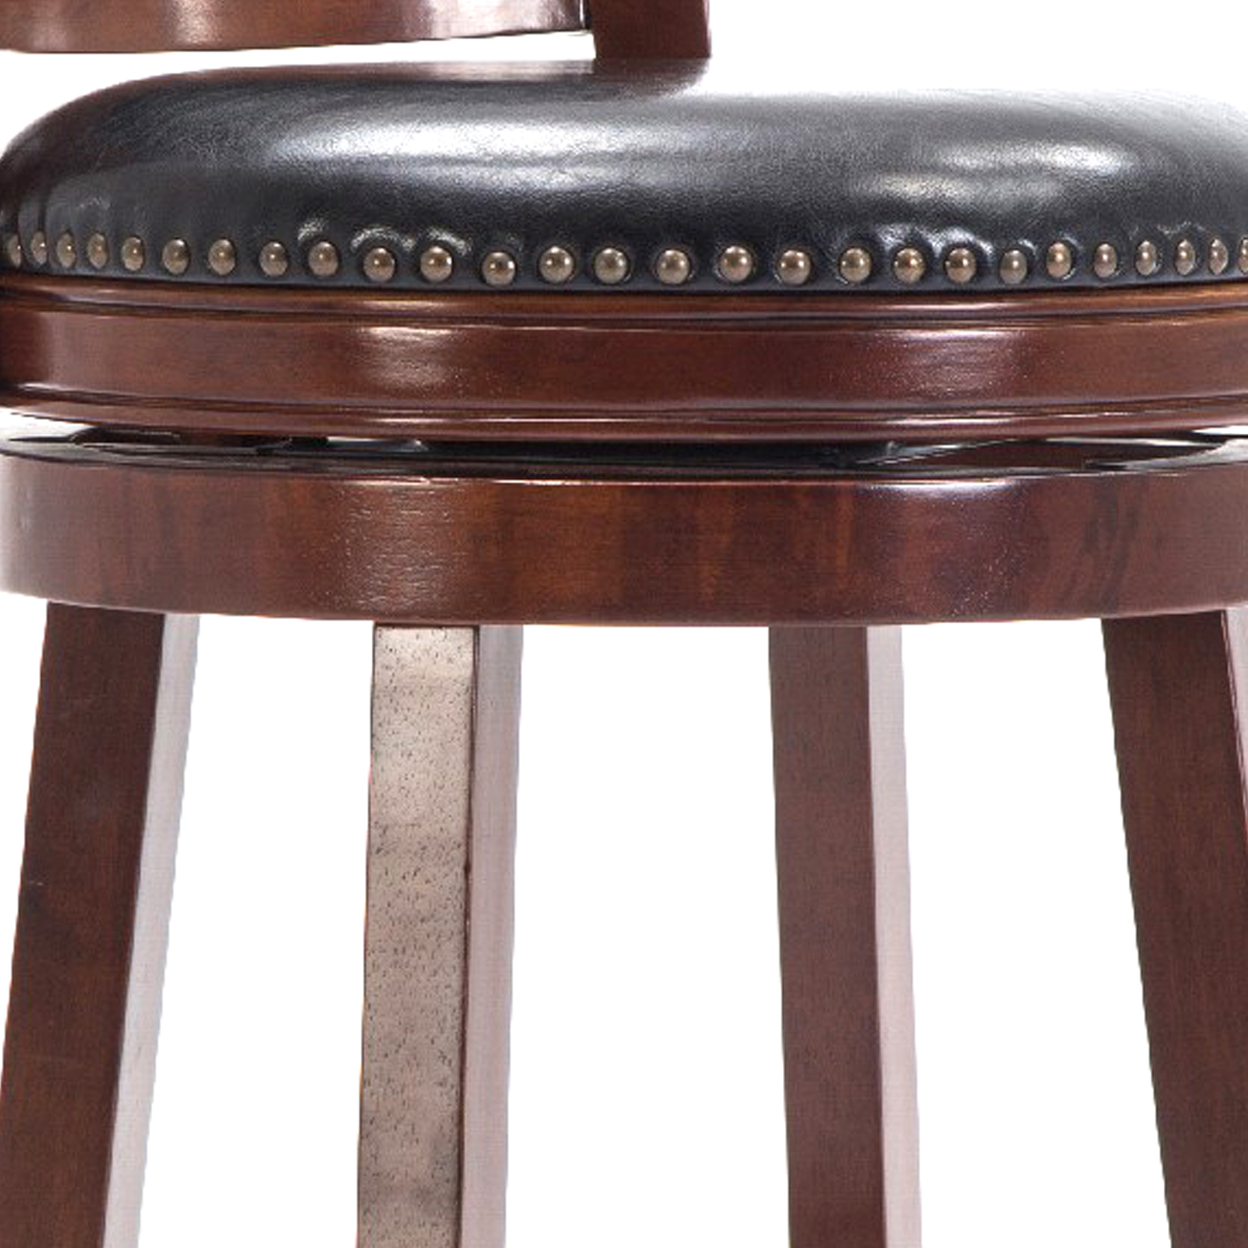 Sabi 29 Inch Swivel Counter Stool, Faux Leather, Brown, Black